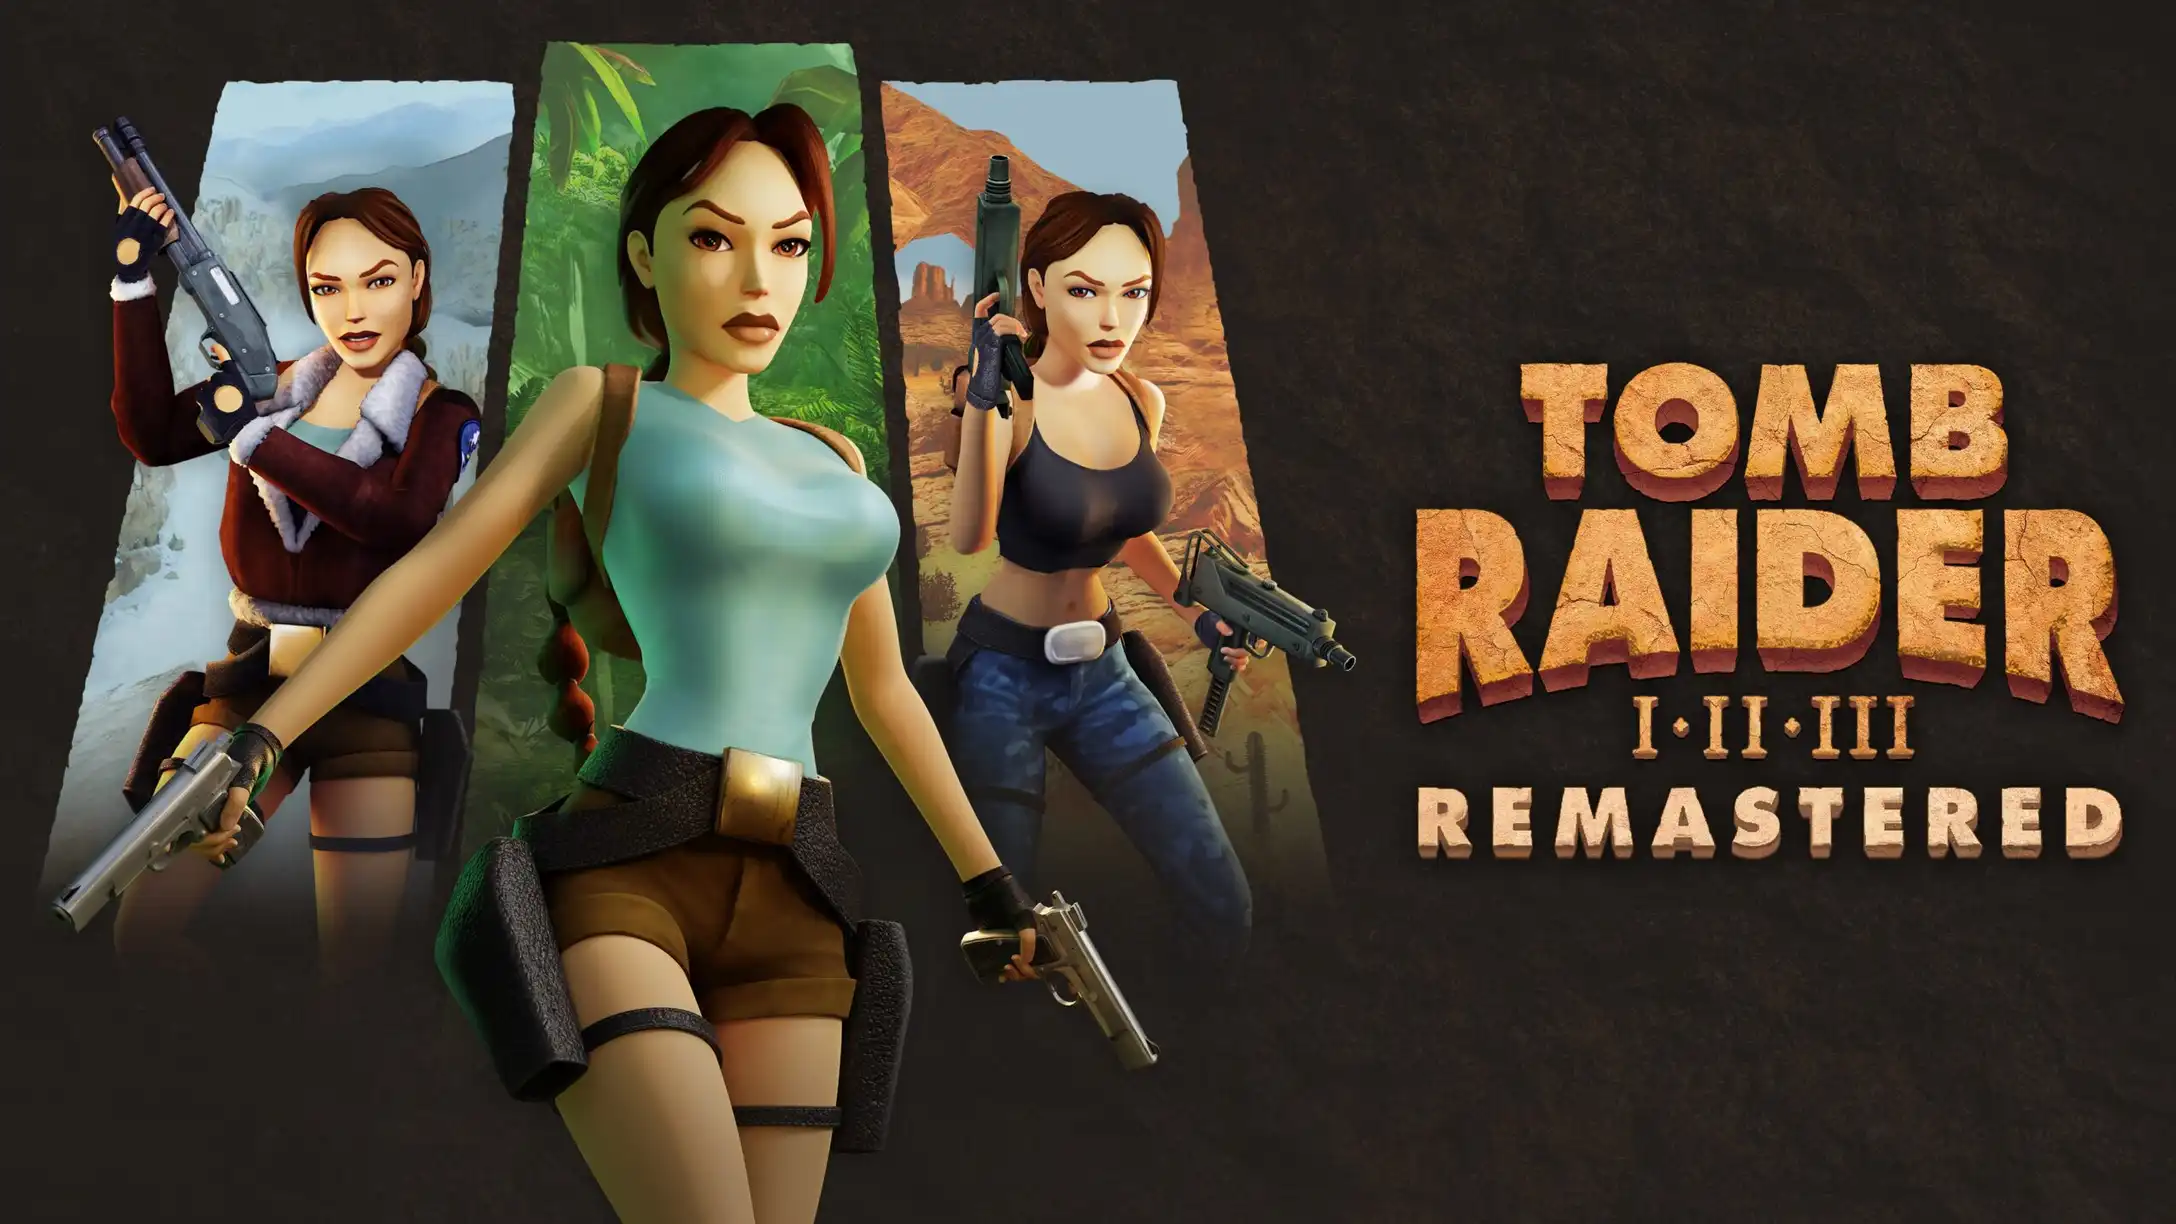 Tomb Raider I-III Remastered details new features